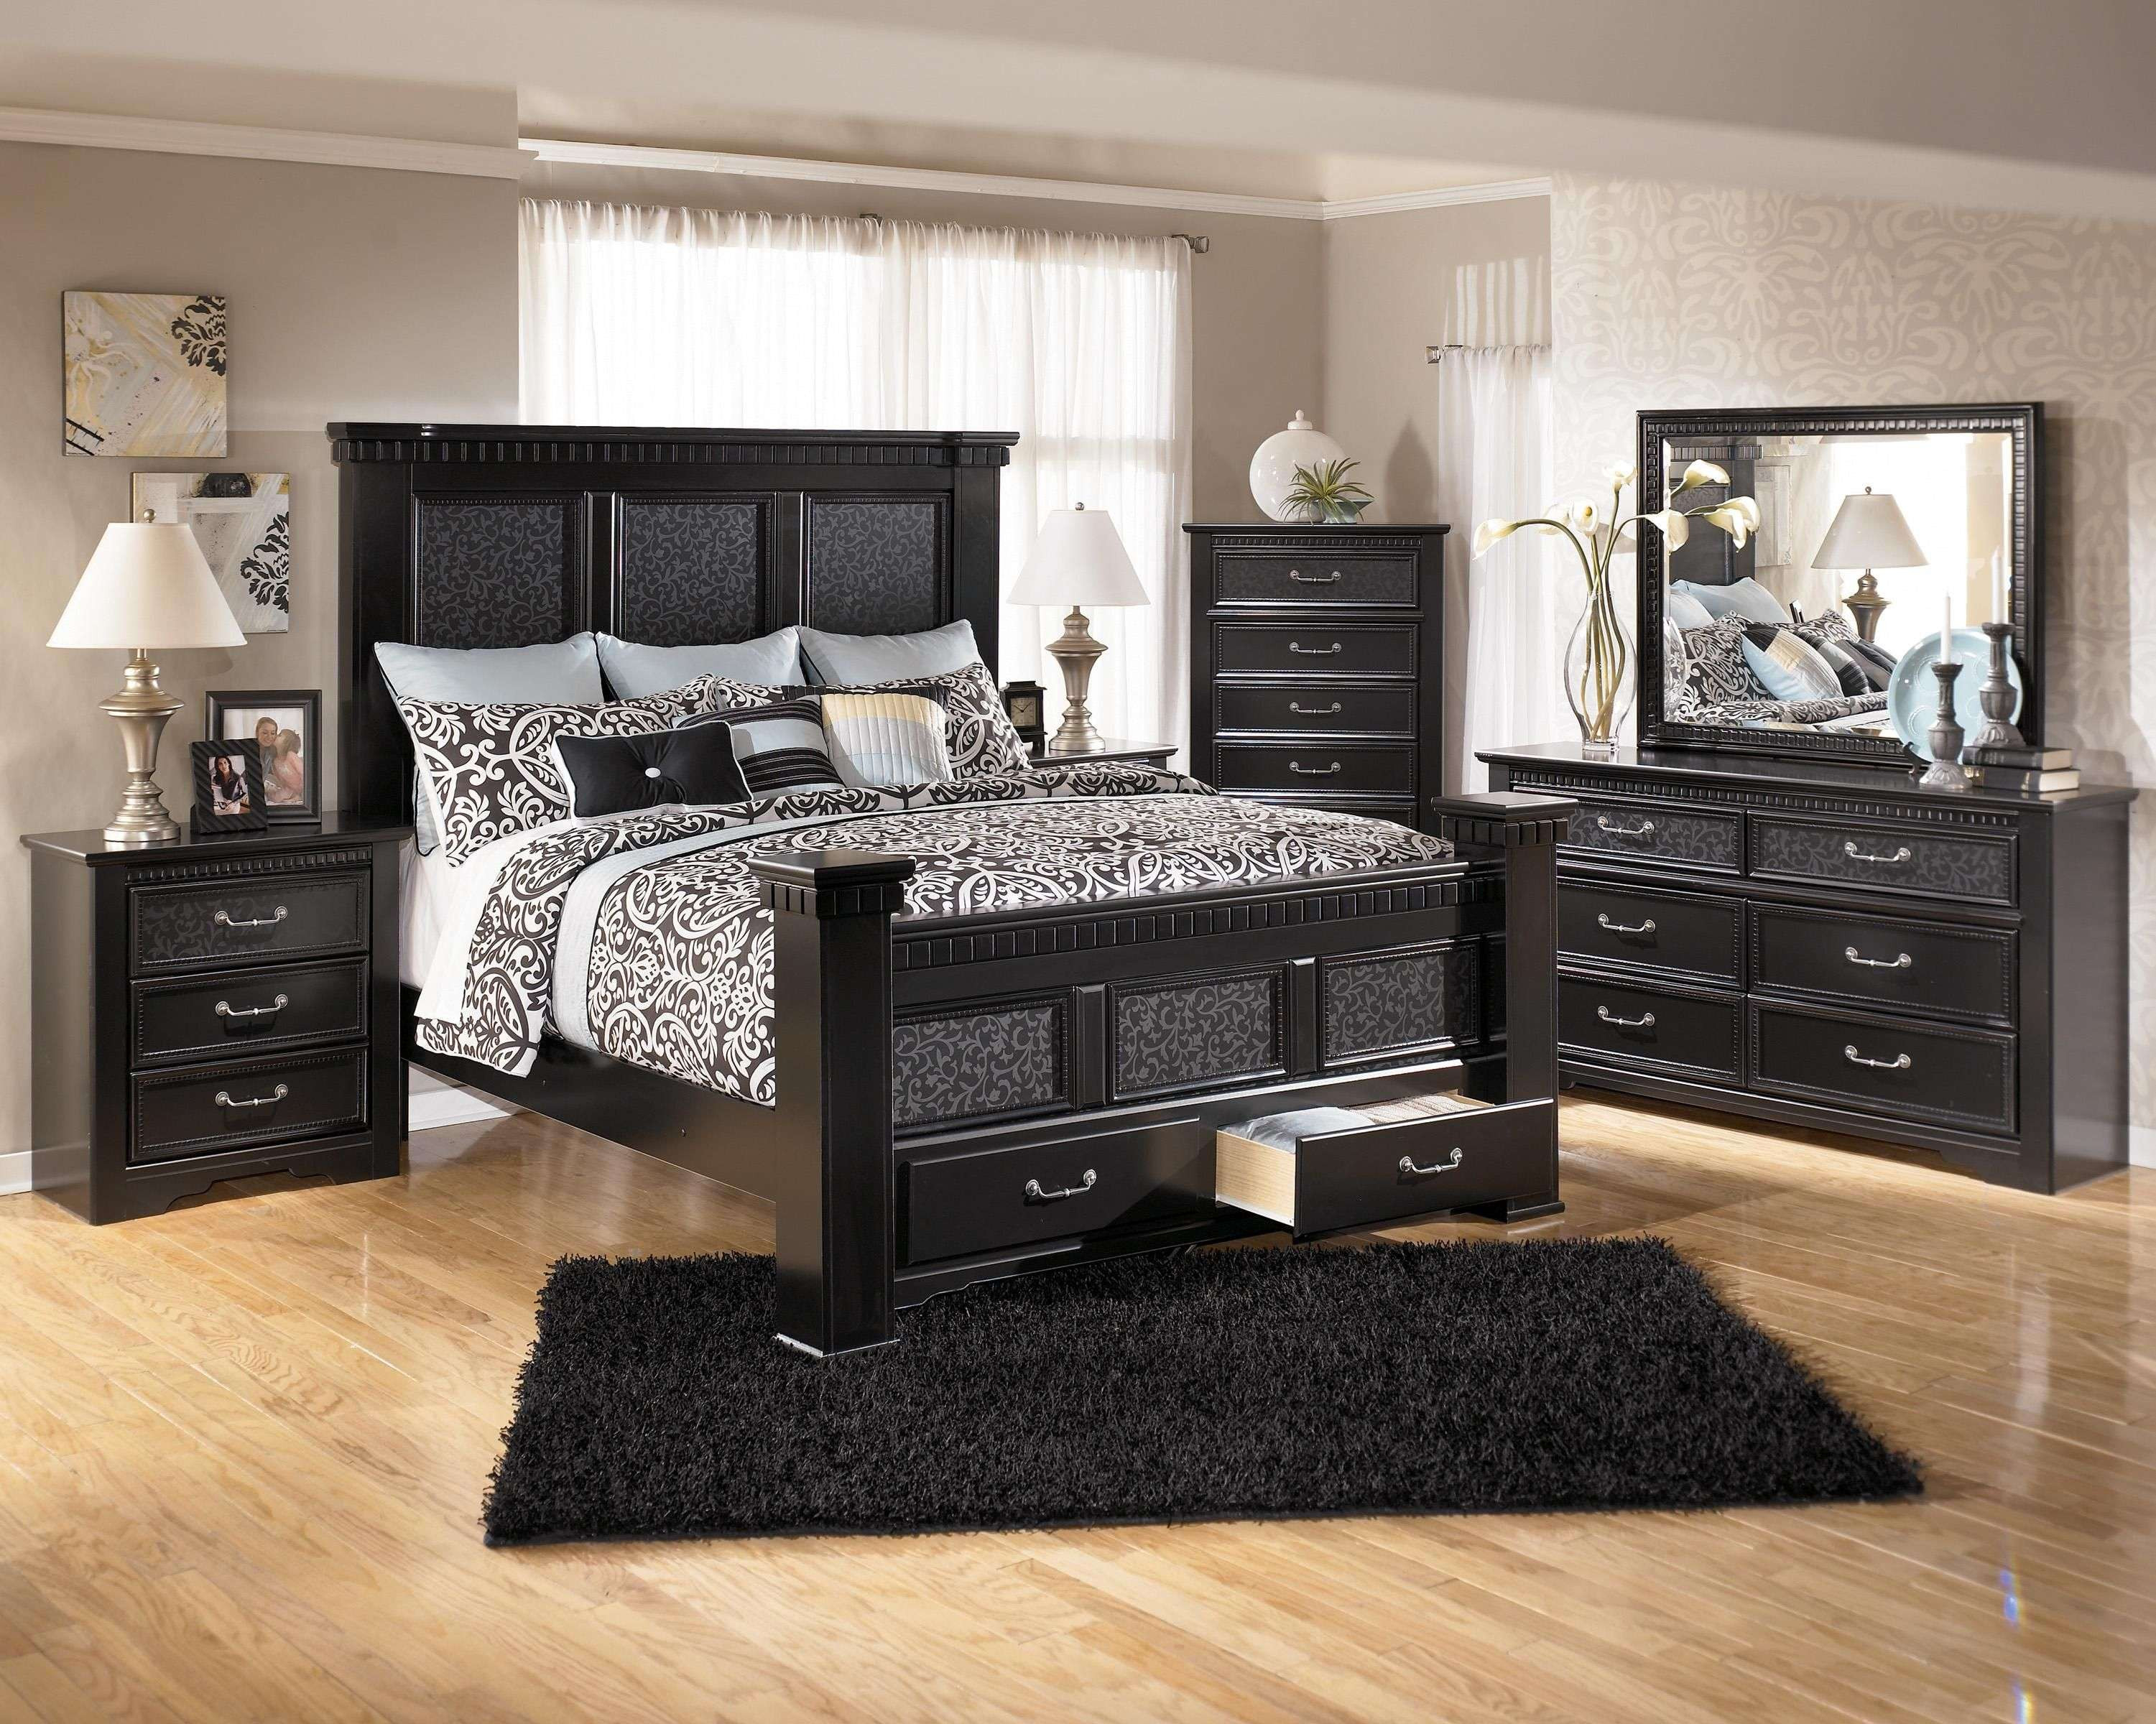 Big Lots Furniture Bedroom Sets At Modern Classic Home Designs in size 3001 X 2400